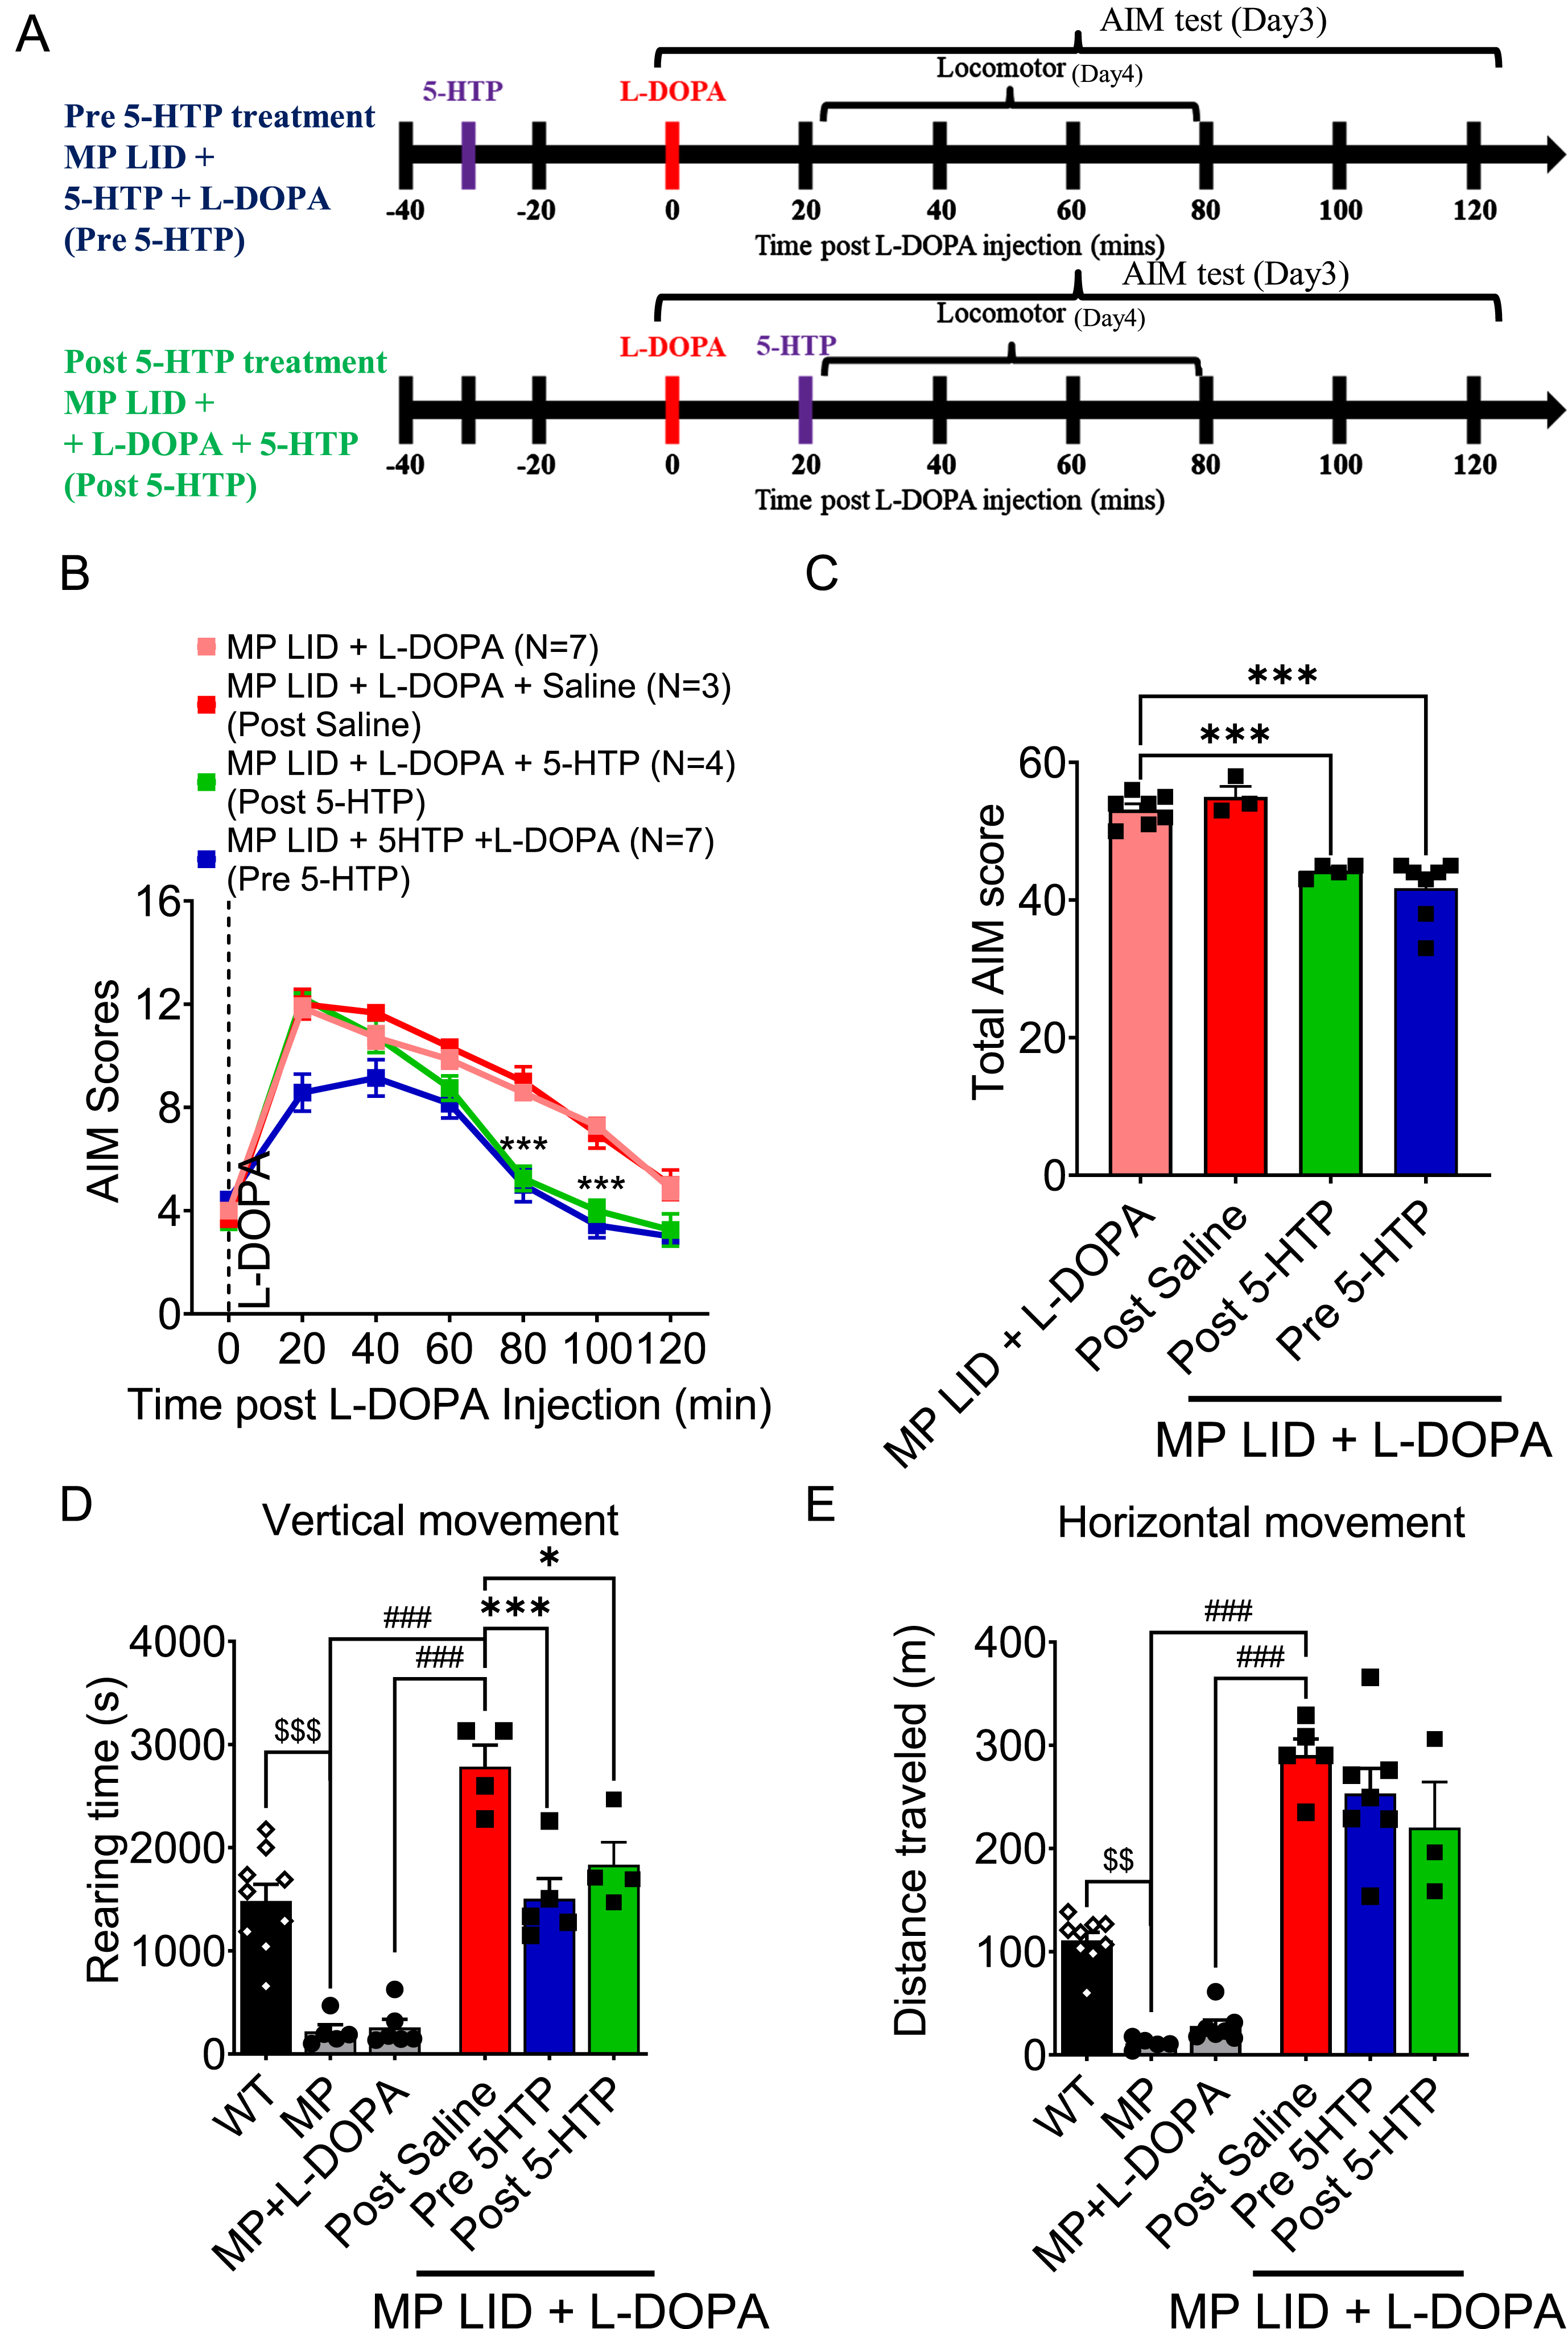 Either pre-treatment or post-treatment with 5-HTP can effectively alleviate L-DOPA-induced dyskinesia in MP LID mice. A) The protocol for administering 5-HTP in MP LID mice involved the following steps: The assessment of AIM scores began immediately after the injection of L-DOPA and continued at 20-min intervals for a total duration of 120 min. B) Although dyskinesia in MP LID mice was found following administration of L-DOPA, the subsequent treatment with 5-HTP alleviated the abnormal symptoms in these mice. Following a 20-min administration of L-DOPA, post-treatment with 5-HTP reduces the abnormal AIM scores at the 80th and 100th min (Two-way ANOVA followed by a Bonferroni post hoc test for multiple comparisons. MP LID + L-DOPA + Saline compared to MP LID + 5-HTP + L-DOPA, ***p < 0.001), (C) as well as reduces the cumulative AIM score from the 20th to the 120th min. One-way ANOVA followed by a Bonferroni post hoc test for multiple comparisons. MP LID + L-DOPA + Saline compared to MP LID + 5-HTP + L-DOPA, ***p < 0.001. D) Locomotor analysis showed significant increases in MP LID groups after L-DOPA injection. The increase in vertical movement observed in the MP LID group following L-DOPA injection was mitigated by pre- or post-treatment with 5-HTP. (MP LID + L-DOPA + saline vs. MP LID + 5-HTP + L-DOPA, p < 0.001; MP LID + L-DOPA + saline vs. MP LID + L-DOPA + 5-HTP, p < 0.05). One-way ANOVA followed by a Bonferroni post hoc test for multiple comparisons. *p < 0.05, ***p < 0.001, compared to MP LID + L-DOPA + Saline; MP + L-DOPA compared to MP LID + L-DOPA + Saline, ###p < 0.001; WT compared to MP, $$$p < 0.001. E) The administration of 5-HTP as a pre-treatment or post-treatment did not result in a reduction of the increased horizontal movement observed after L-DOPA injection. One-way ANOVA followed by a Bonferroni post hoc test for multiple comparisons. MP + L-DOPA compared to MP LID + L-DOPA + Saline, ###p < 0.001; WT compared to MP, $$p < 0.01.